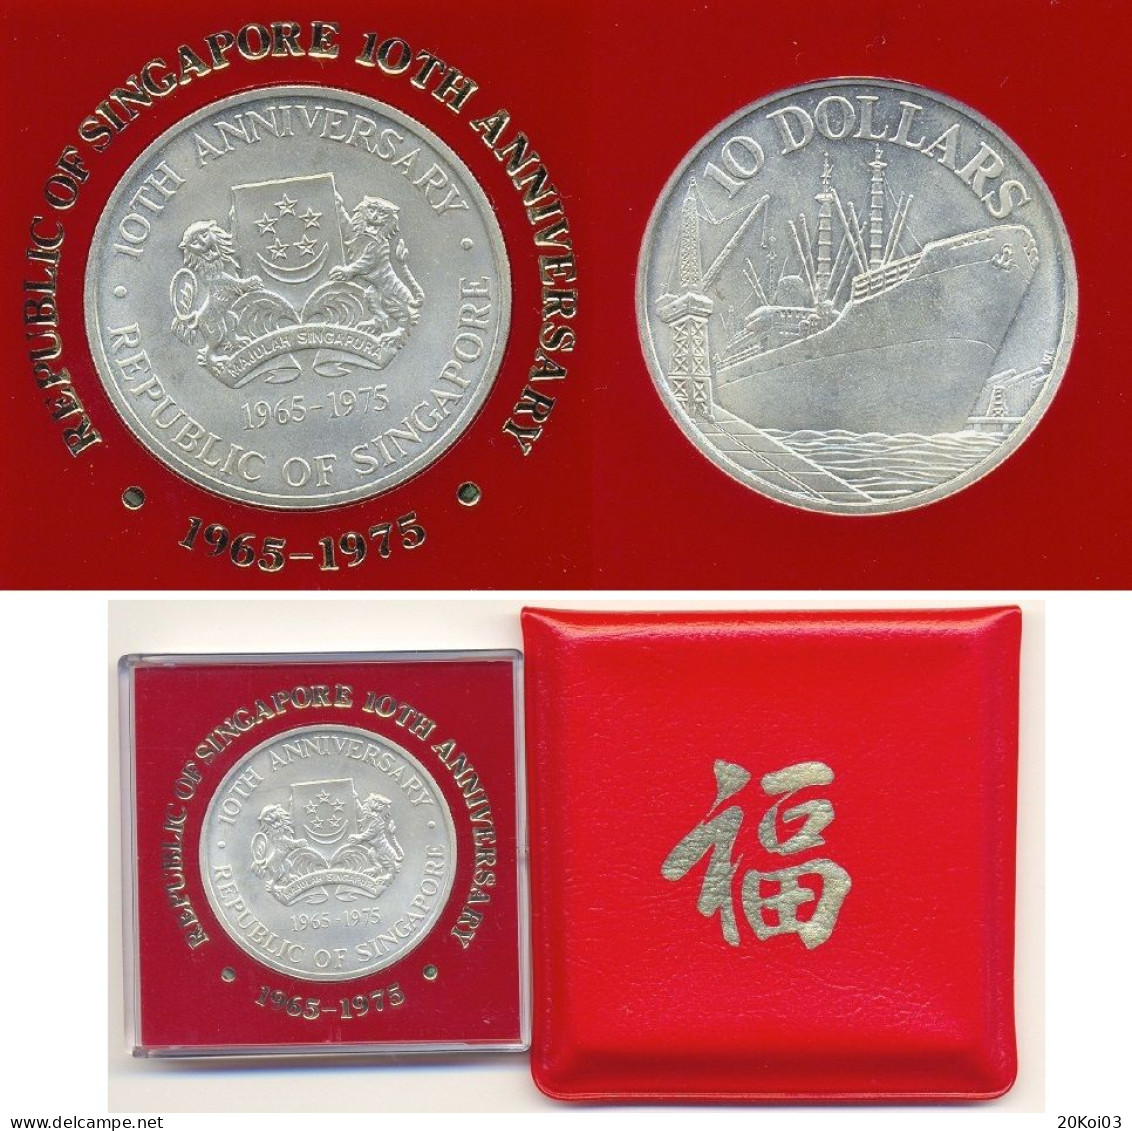 Singapore 10 Dollars 1965-1975 10th Anniversary Coin Argent-Silver - Singapour